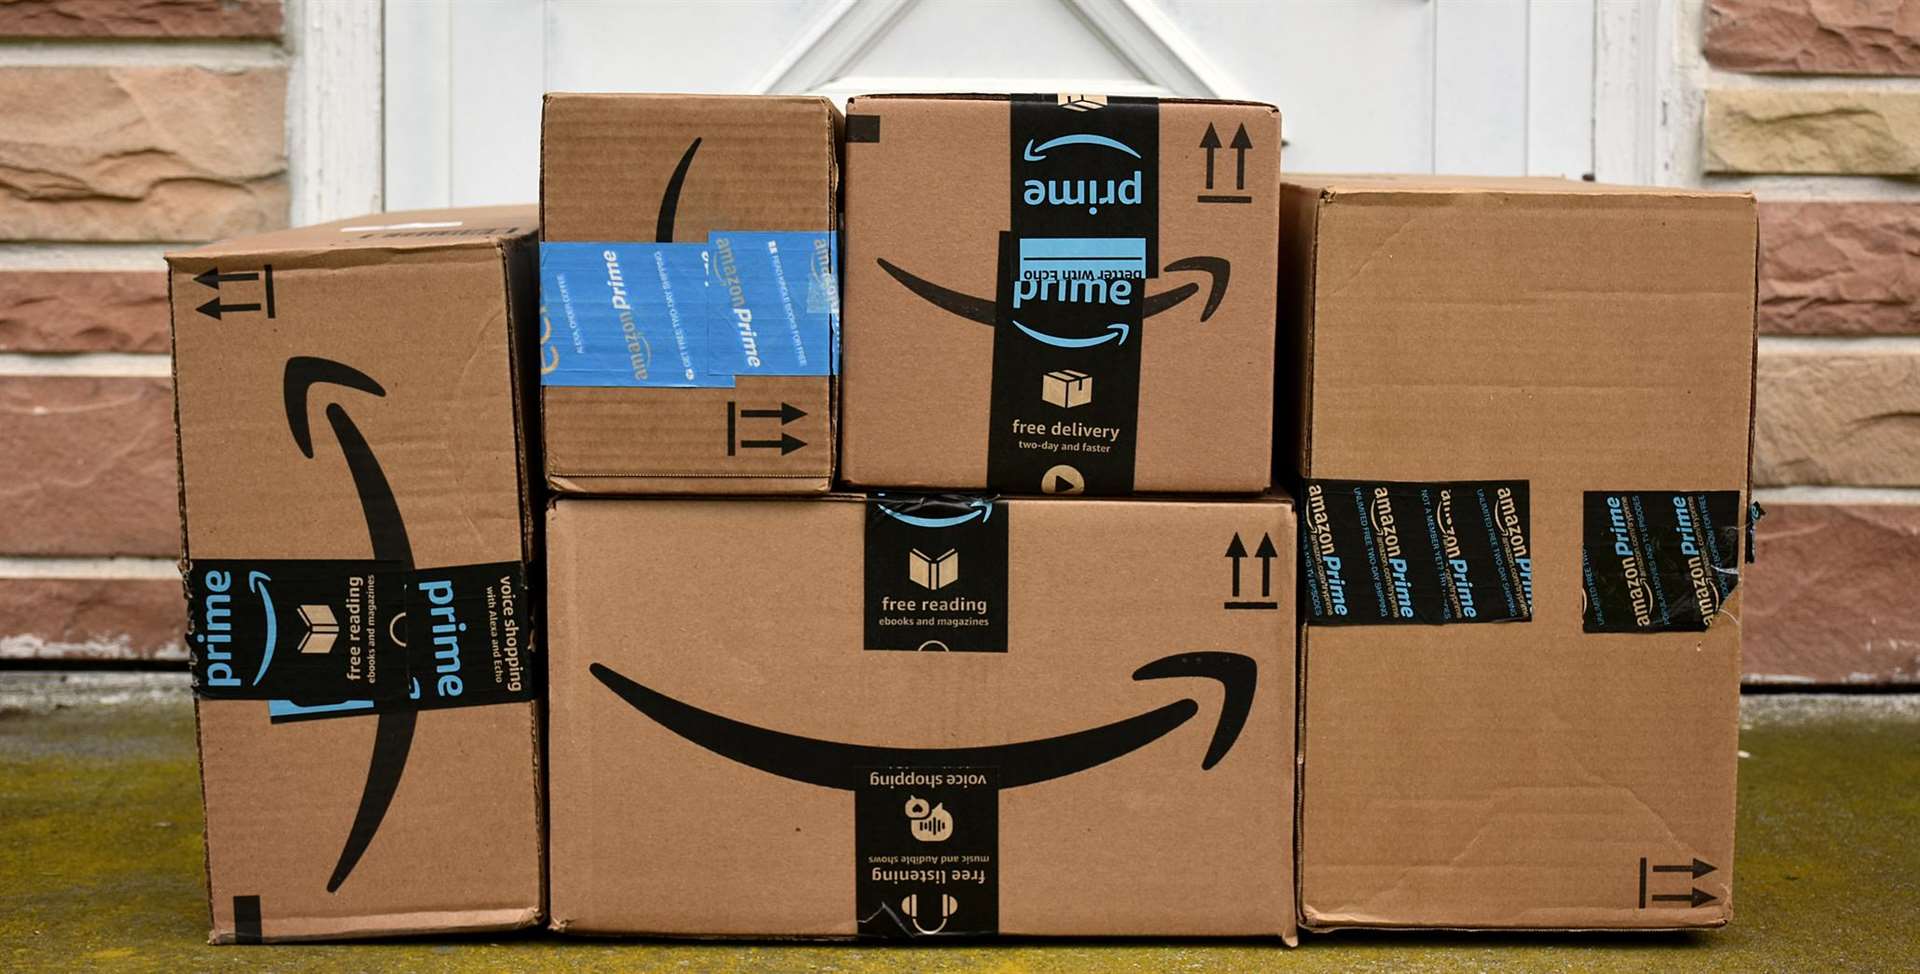 Amazon are gearing up for their annual Prime Day sale on Monday, July 16